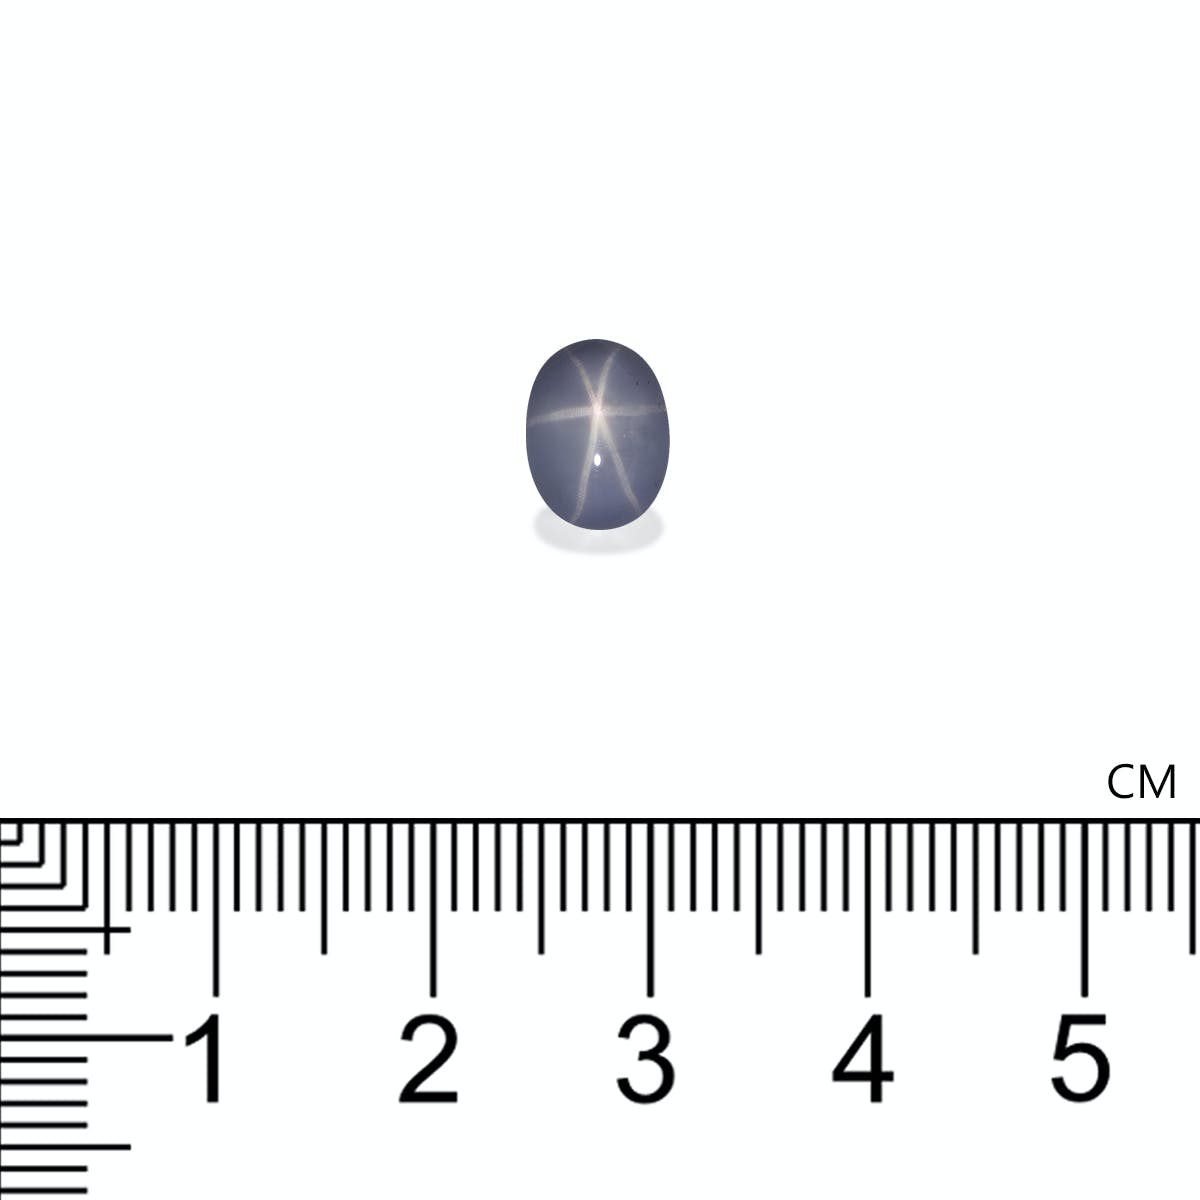 Picture of Star Sapphire 2.49ct (SS0025)